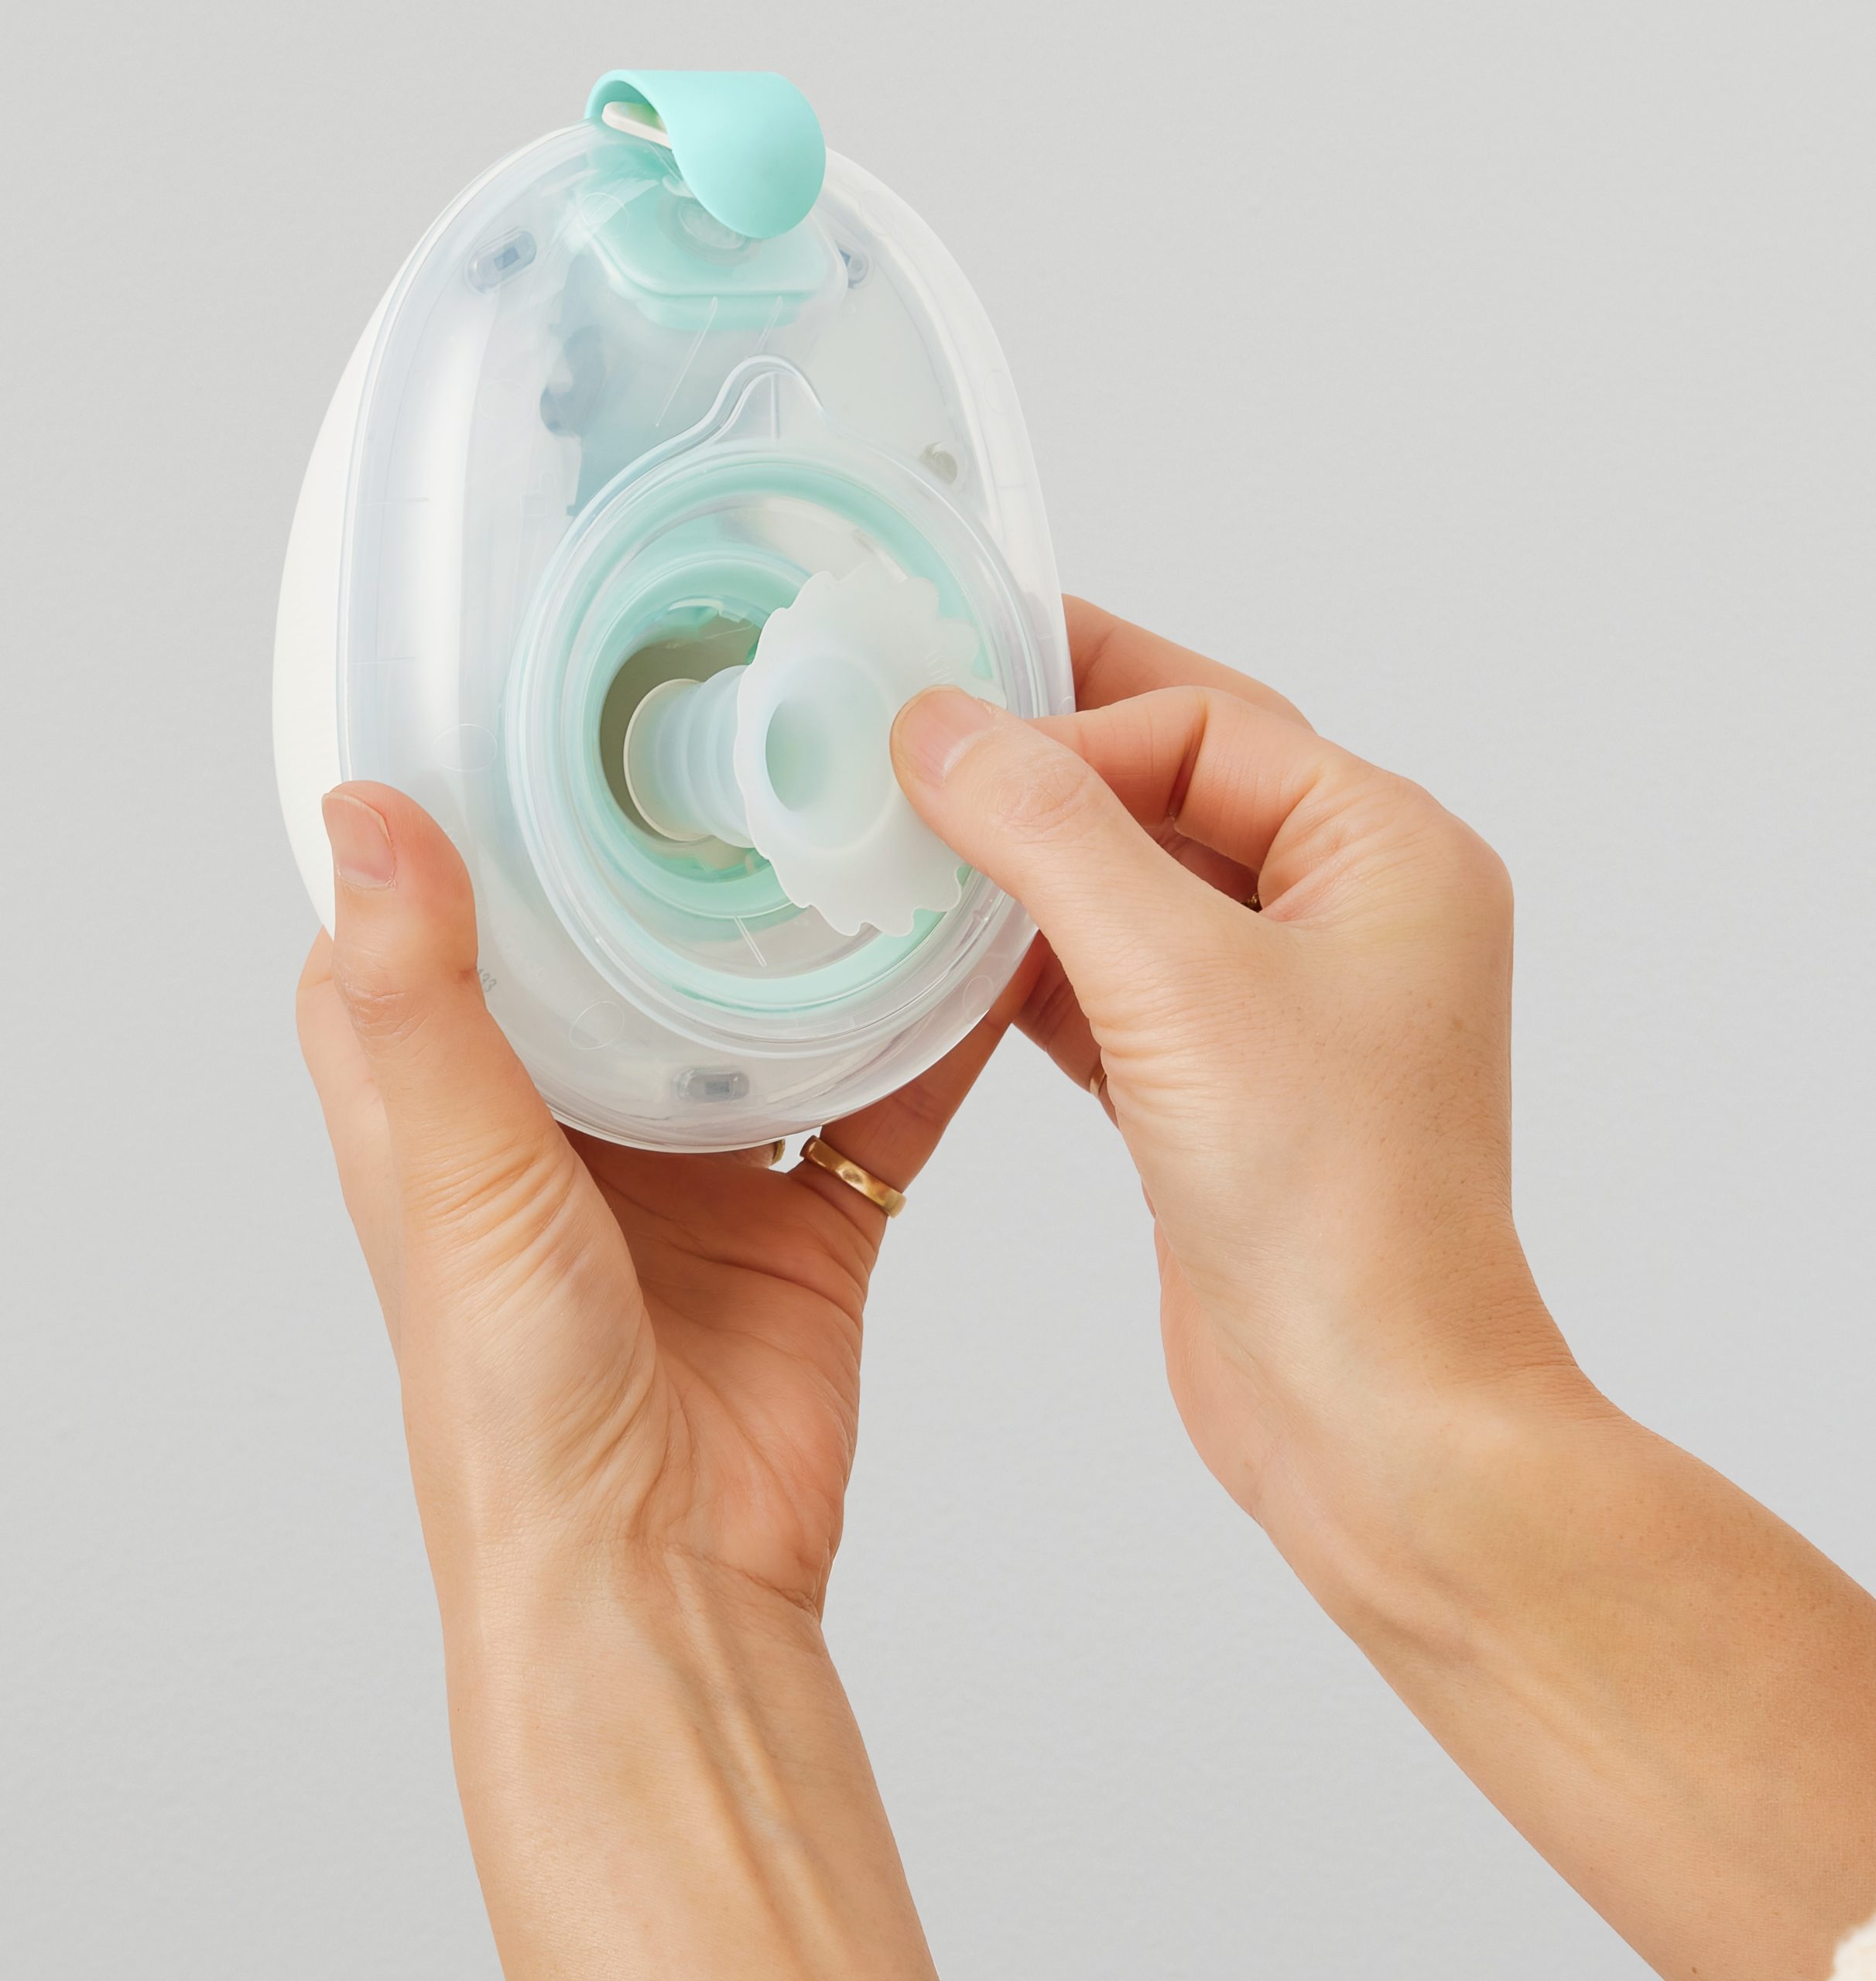 Willow Go Wearable Breast Pump - Neb Medical